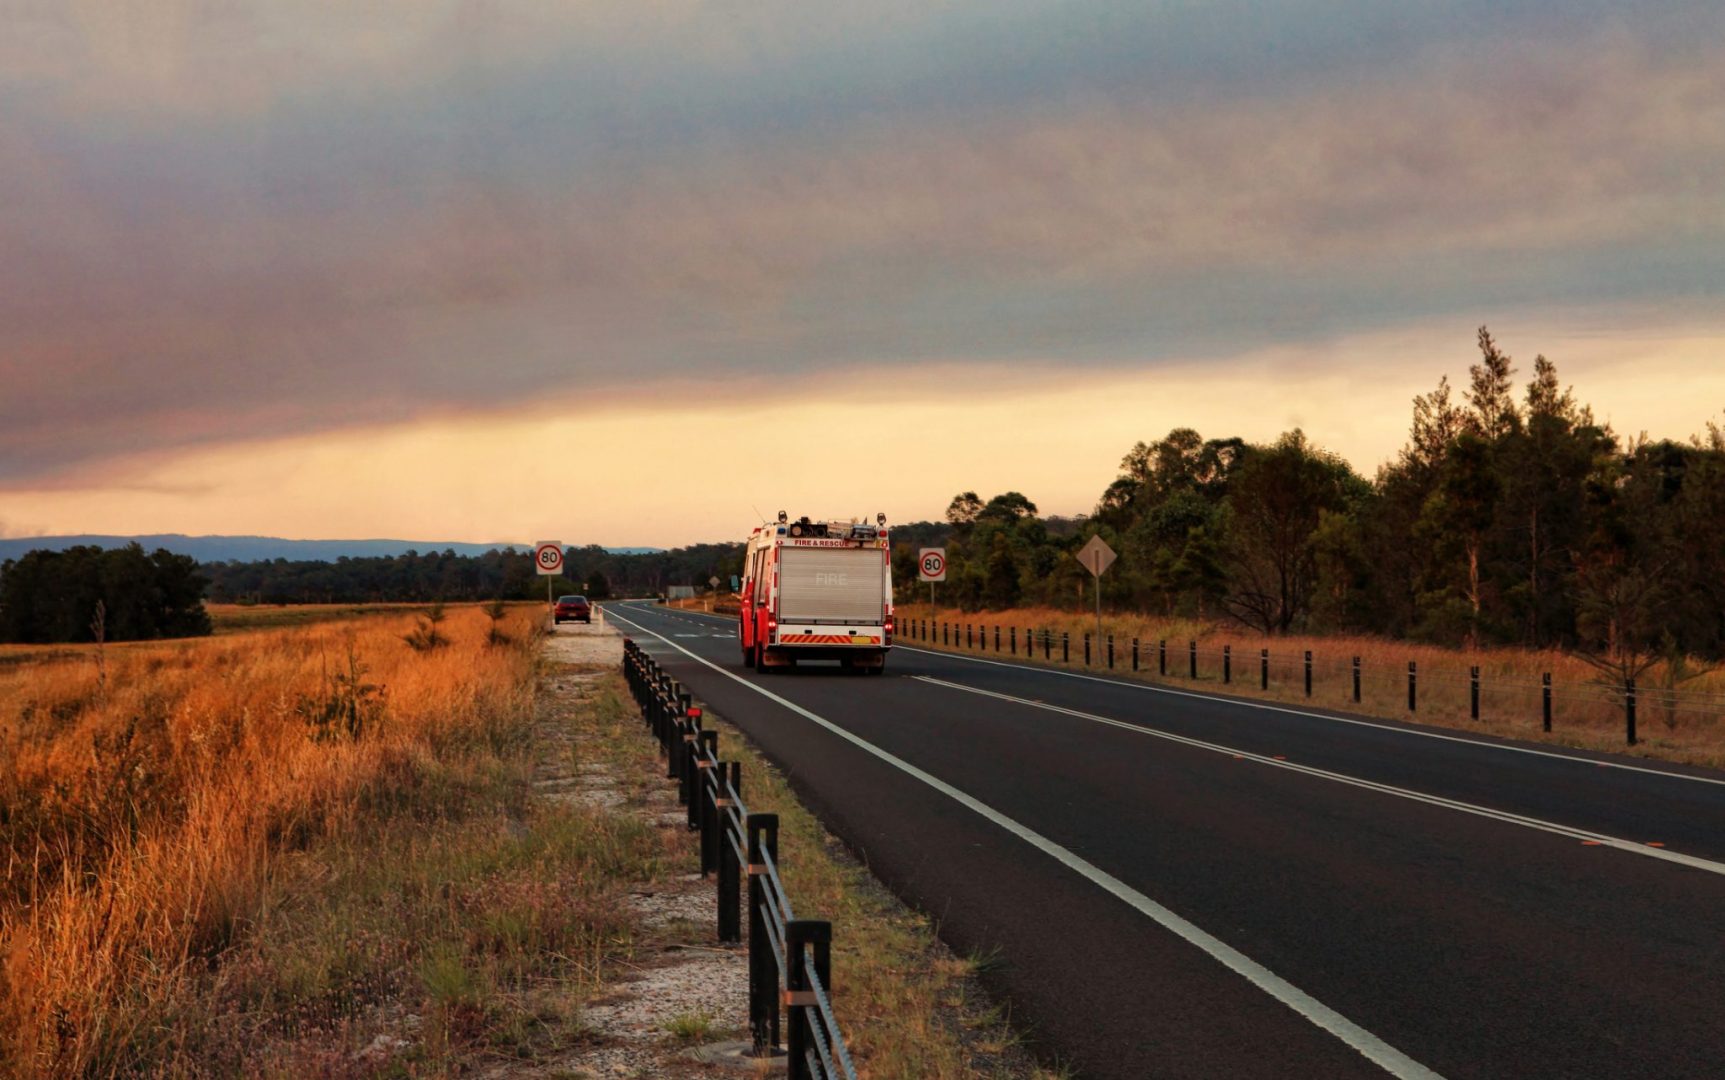 Bushfire relief: how you can help